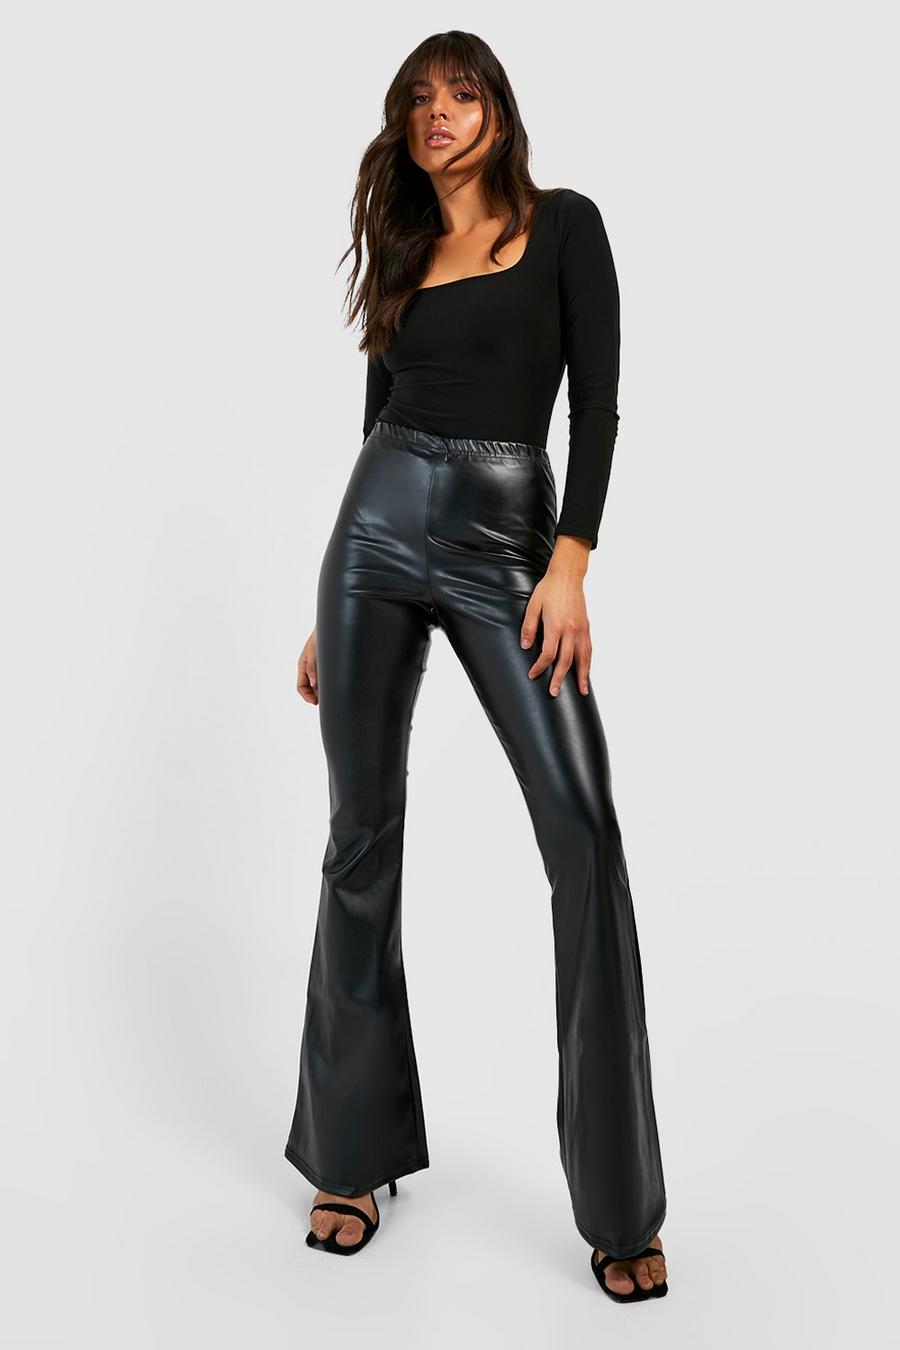 Black Leather Look PU Faux Leather Flares